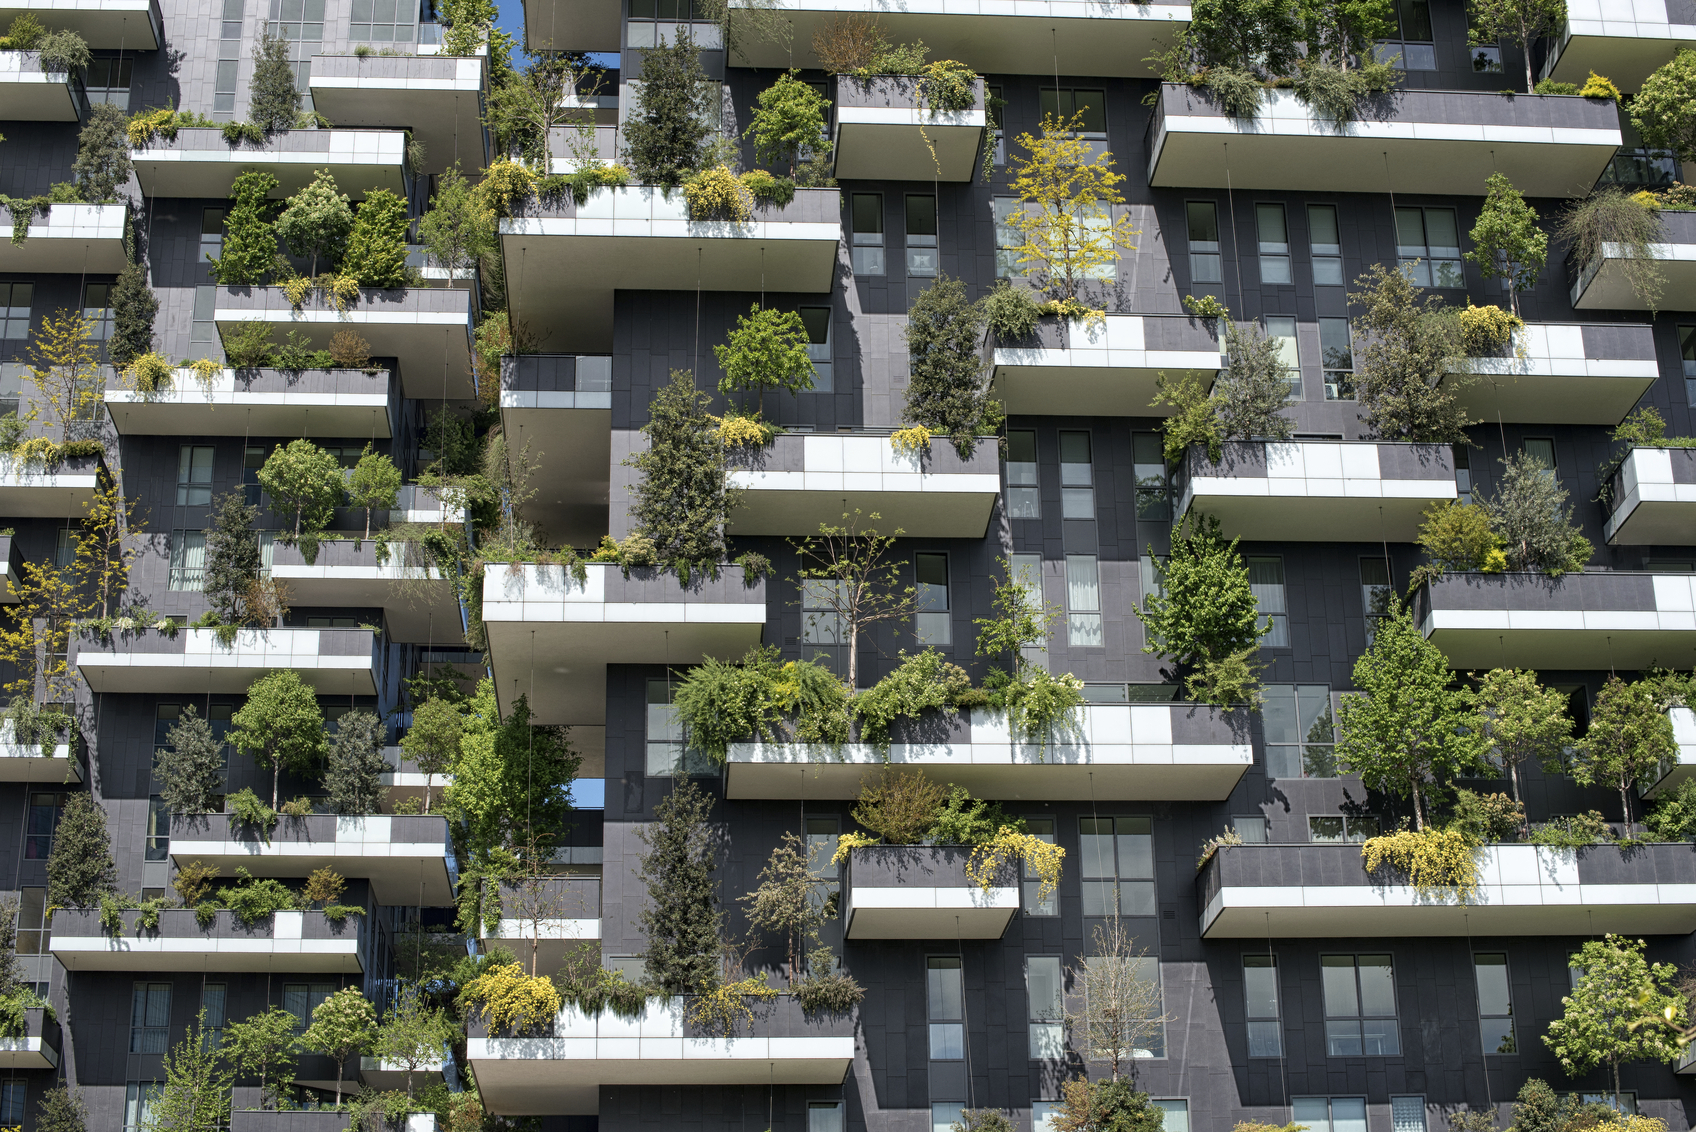 Tight detail view on trees and shrubs on vertical forest apartment building in downtown Milan, Italy